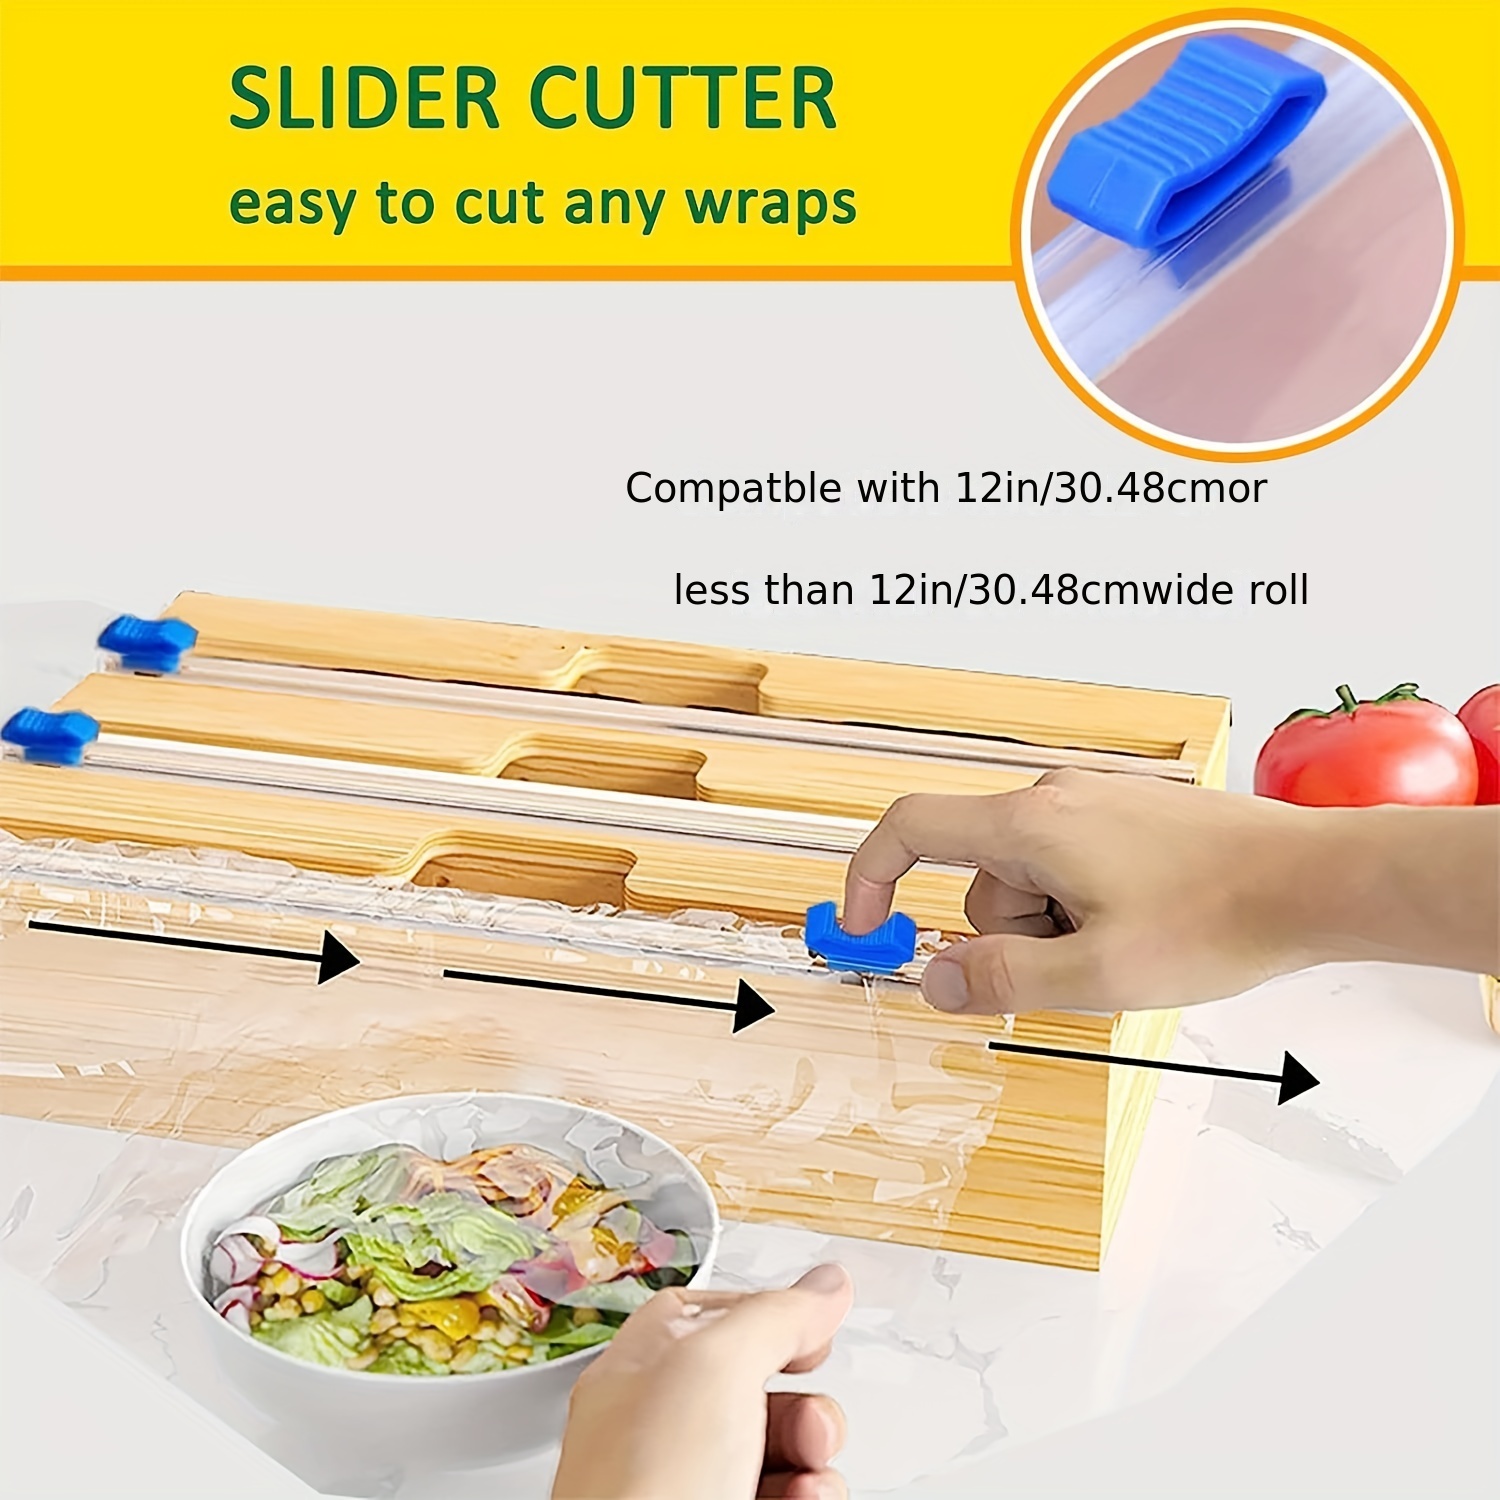 Bamboo Wood Plastic Wrap Dispenser With Slide Cutter Also For 12